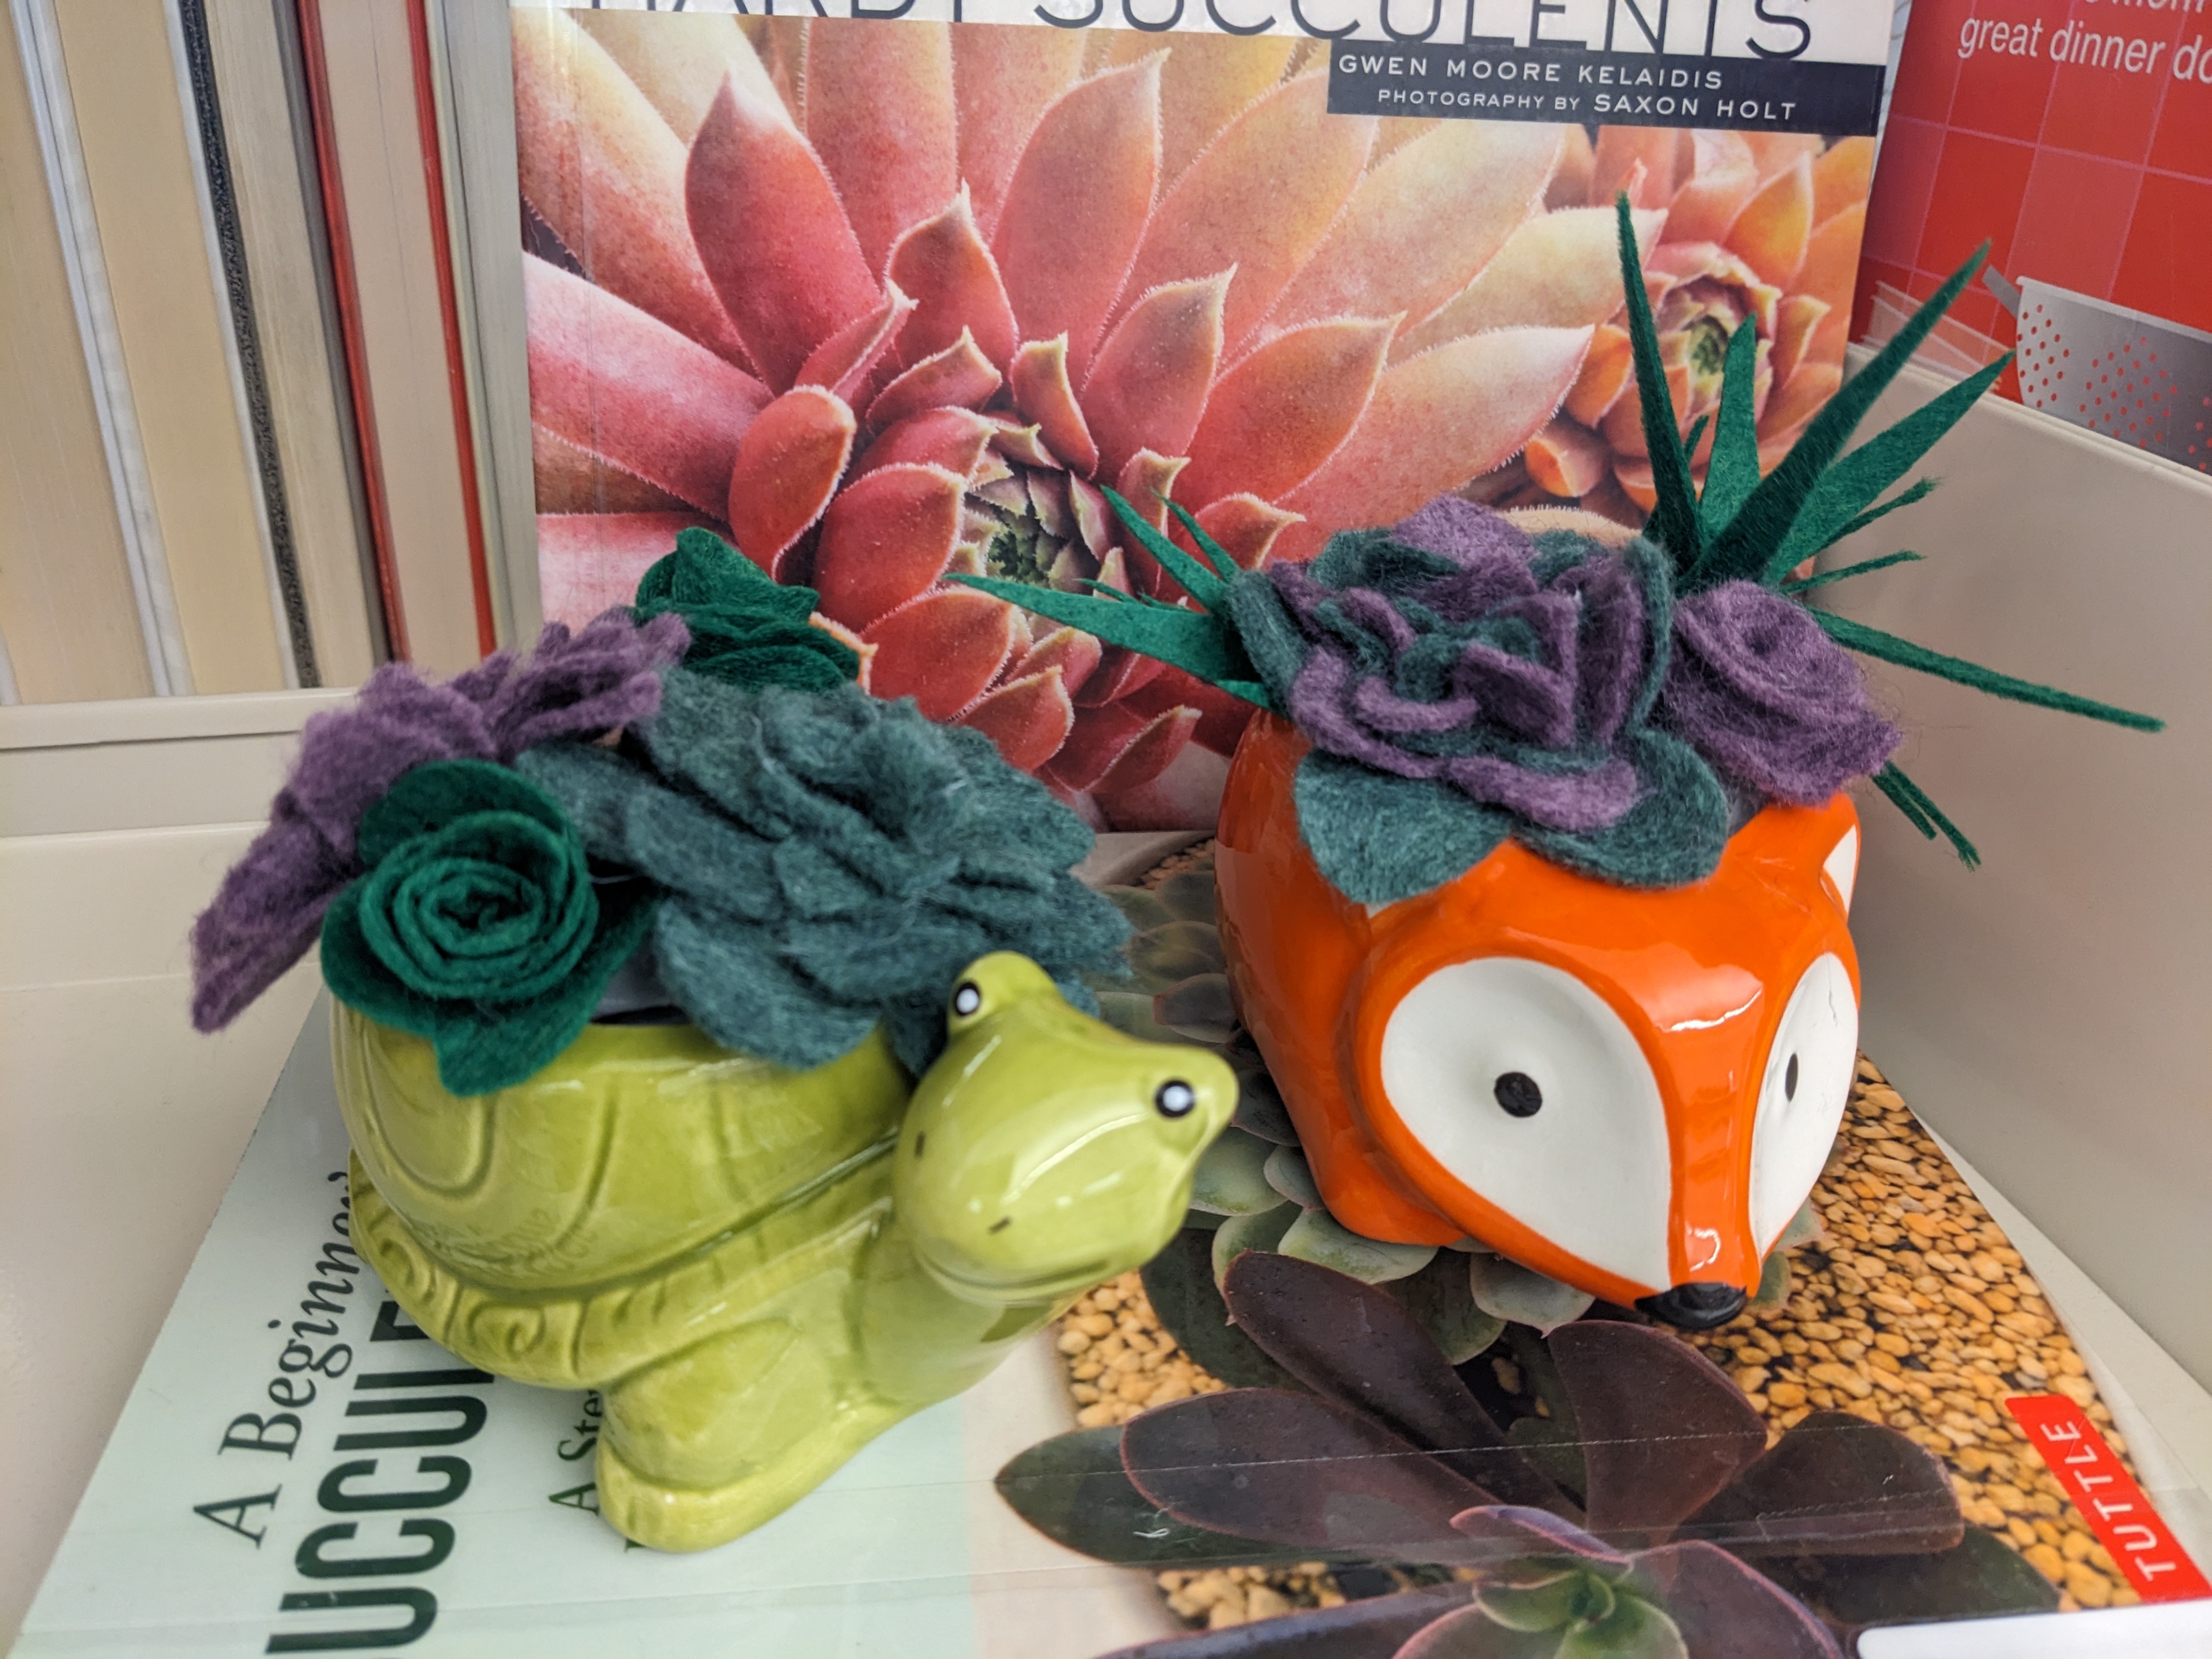 Small green turtle and orange and white fox shaped planters with green and purple felt succulents displayed with colorful succulent photo books